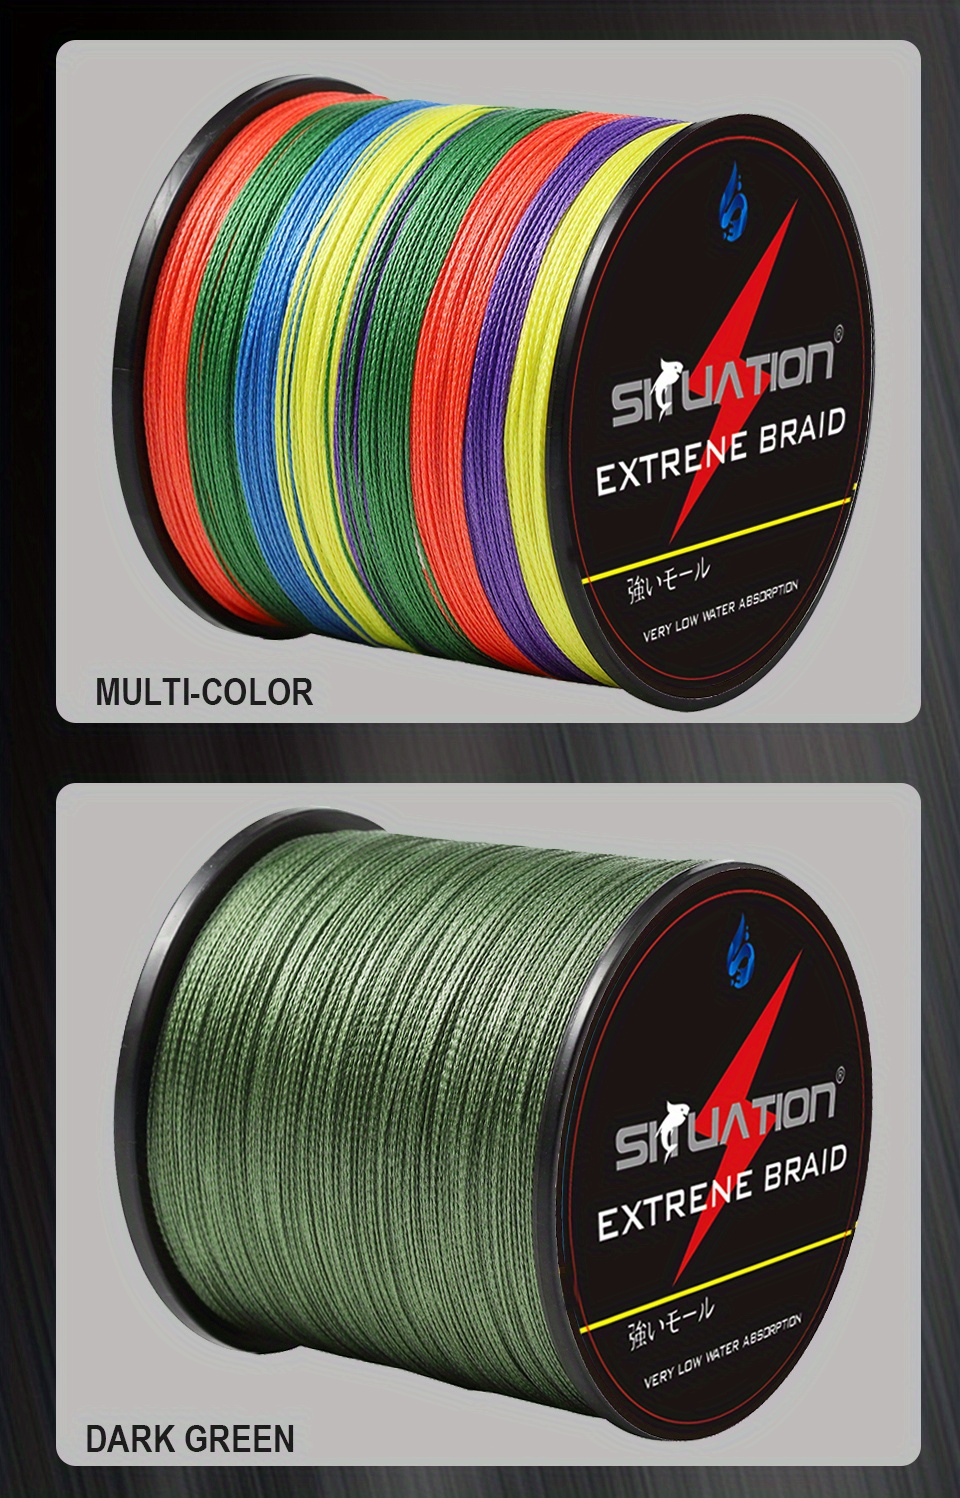 Shaddock Fishing Super Strong Braided Fishing Line - 4 Strands  Multifilament Pe Fishing Line - Abrasion Resistant Braided Lines -  Incredible Super